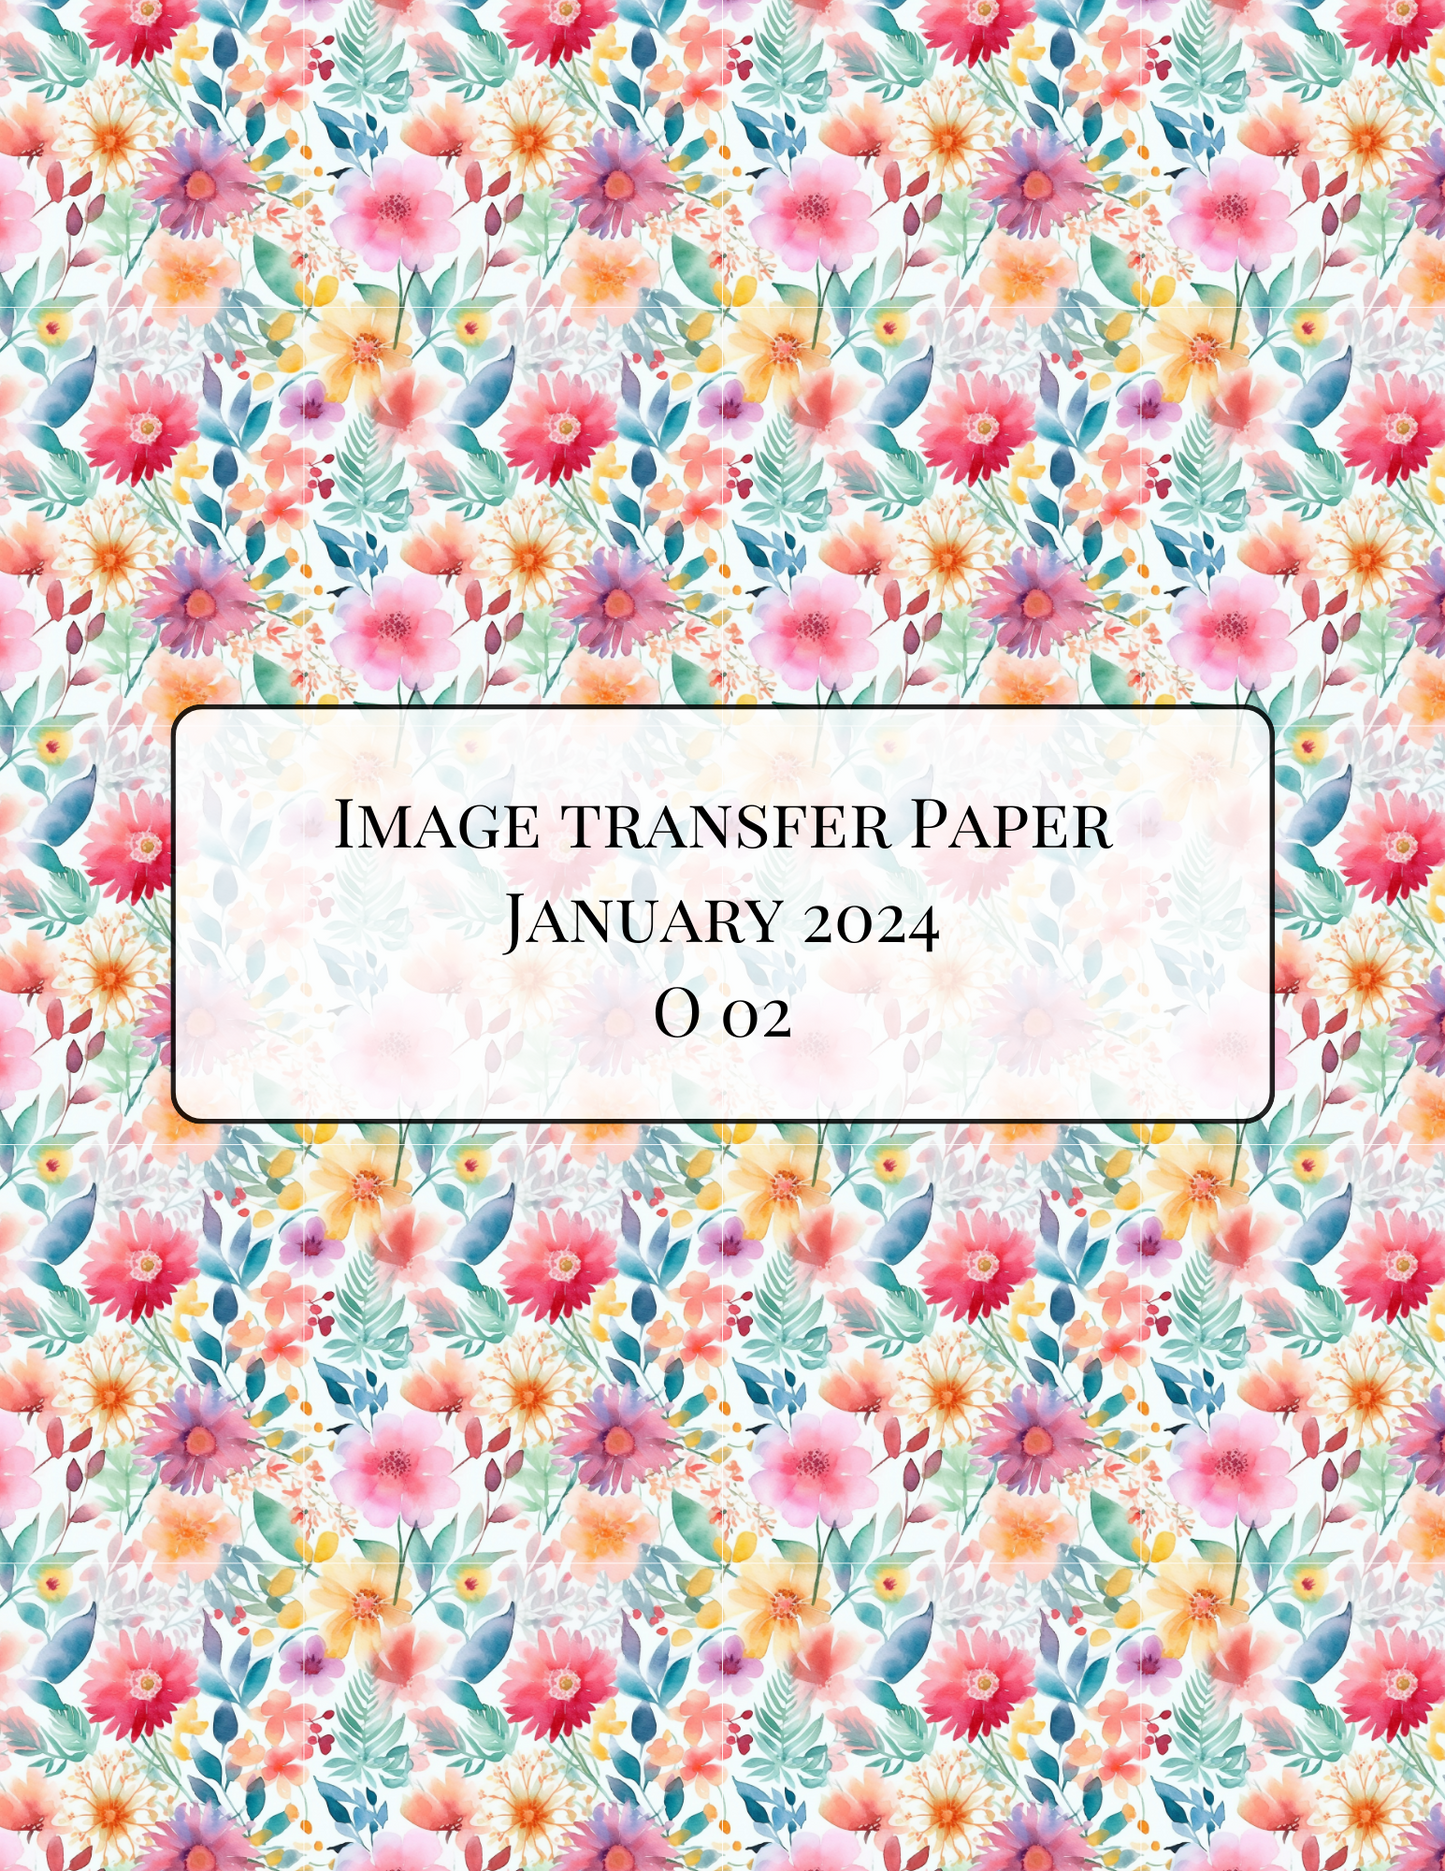 O02 Transfer Paper - January Launch